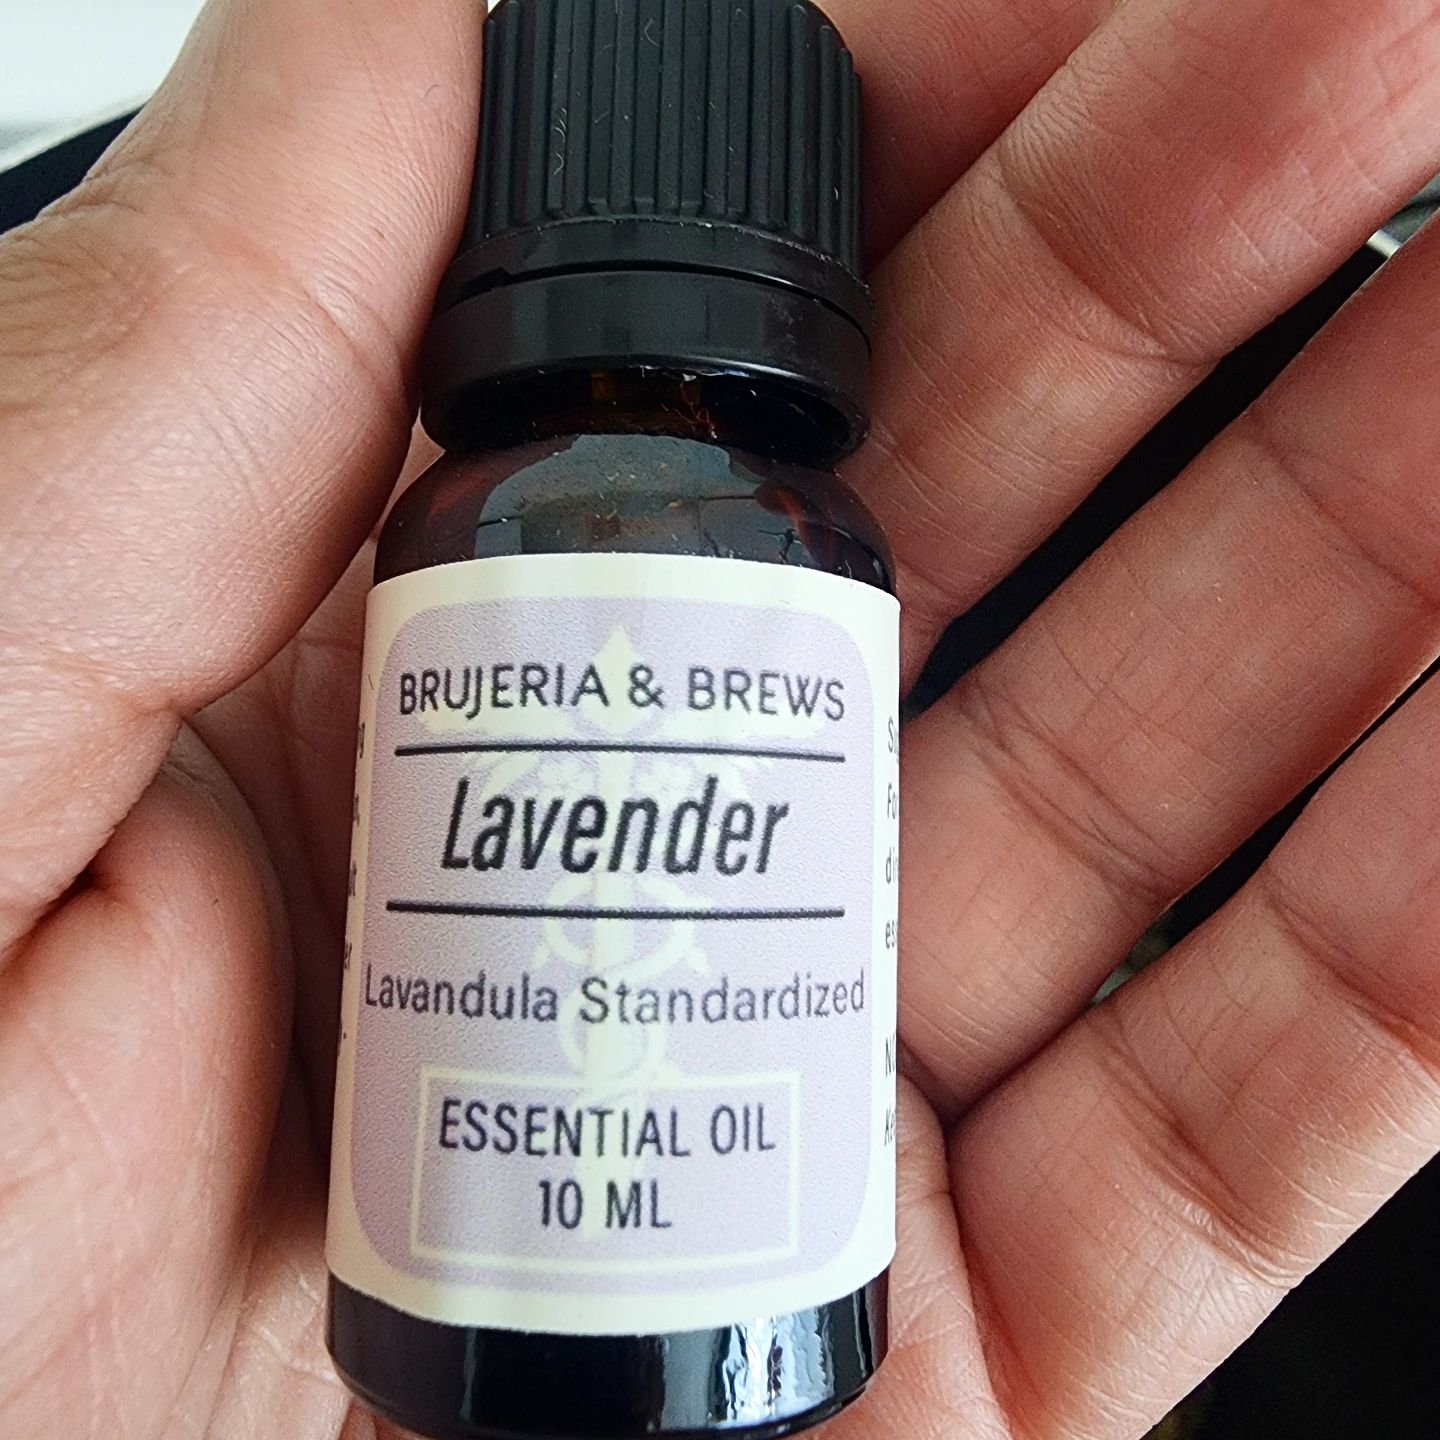 Why, yes, I use my own oils. Did you know we have essential oils just a click away?

Had to break this open for that one thing that's on pre-sale that I emailed y'all about. Did you get the email? Did you place your order?

#Apothecary #BrujeriaandBr